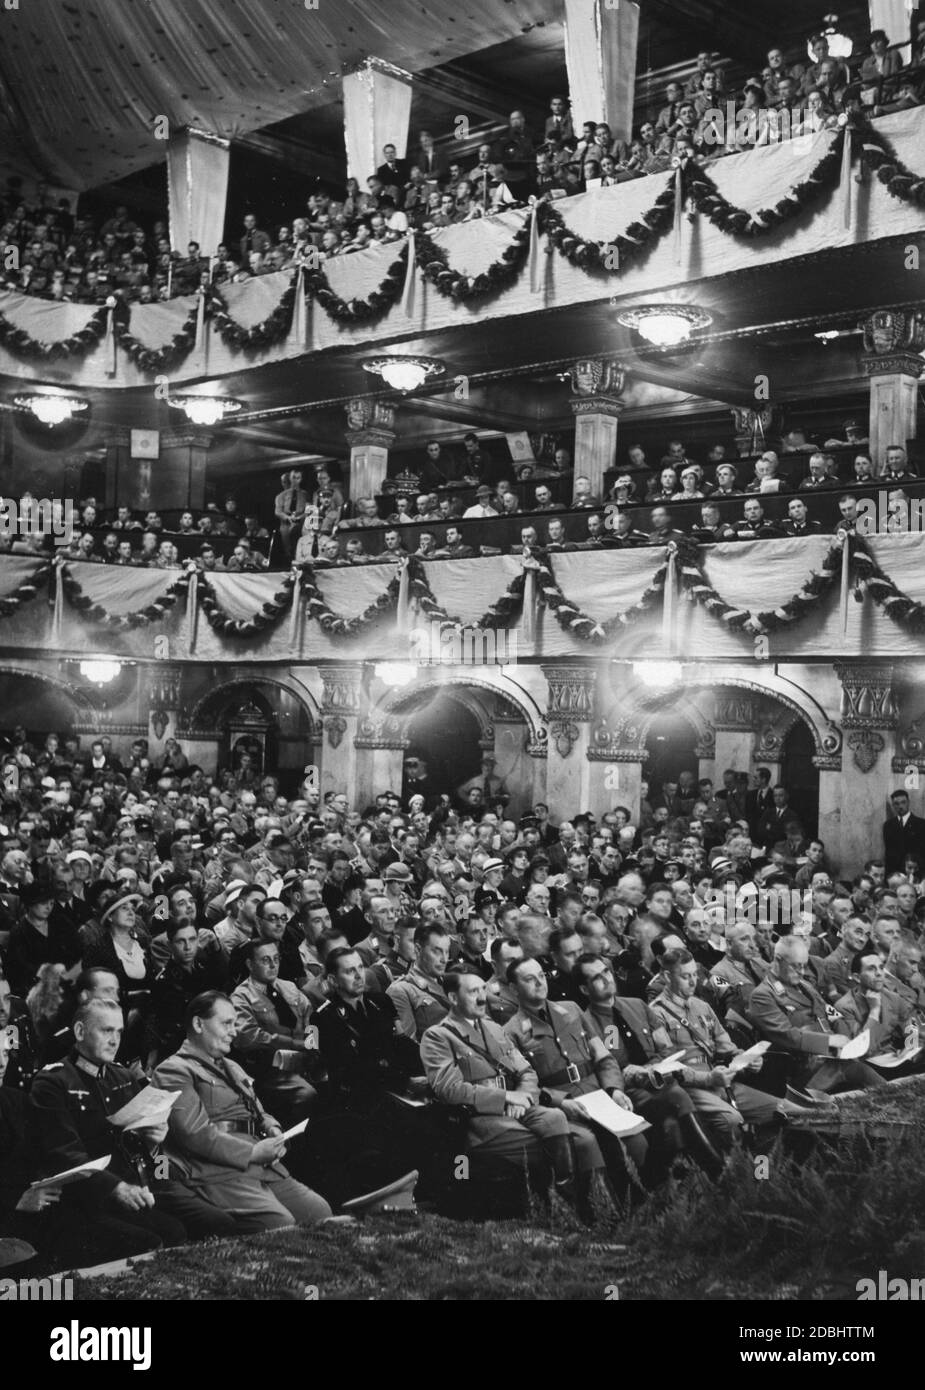 View of the first row of spectators at the cultural conference of the NSDAP in Nuremberg's Apollo Theater, where Alfred Rosenberg and Adolf Hitler give speeches and the Reich Symphony Orchestra offers a musical performance. 1st row from left: Johann Ludwig Graf Schwerin von Krosigk, Colonel General Werner von Blomberg, Hermann Goering, Adolf Hitler, Alfred Rosenberg, Rudolf Hess, Viktor Lutze, ?, Joseph Gobbels, Wilhelm Frick (behind him Max Amann). In the 2nd row behind von Blomberg, Erich Raeder. Behind Adolf Hitler: Julius Schaub, on the right Wilhelm Brueckner, Martin Bormann, ? and Stock Photo